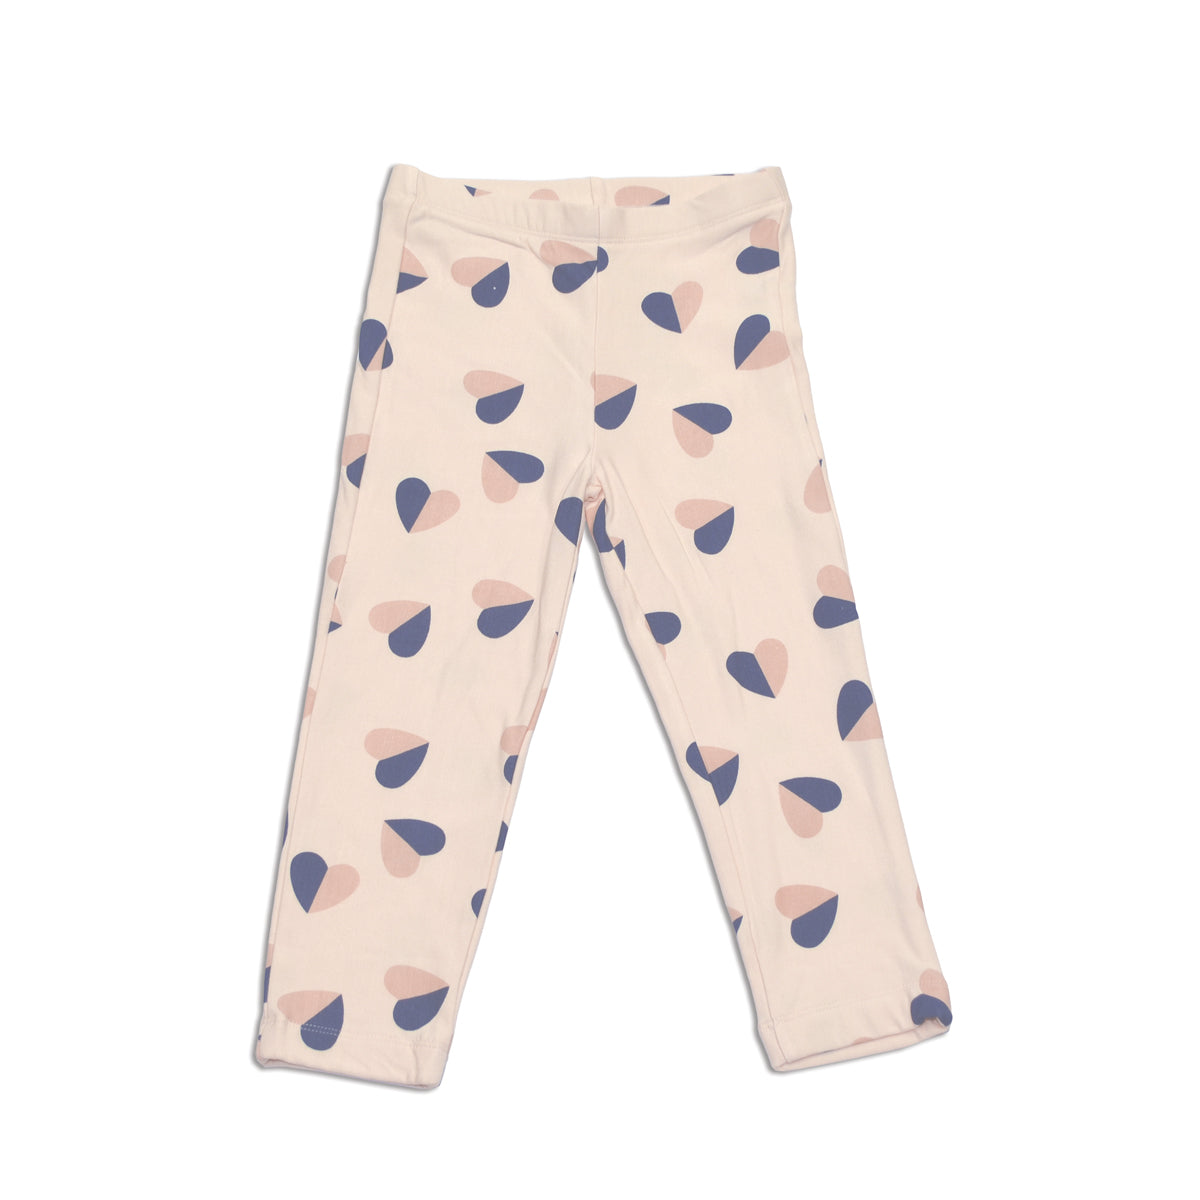 Bamboo Girl Loop Legging - Pink Heart - 3T – The Little Clothing Company